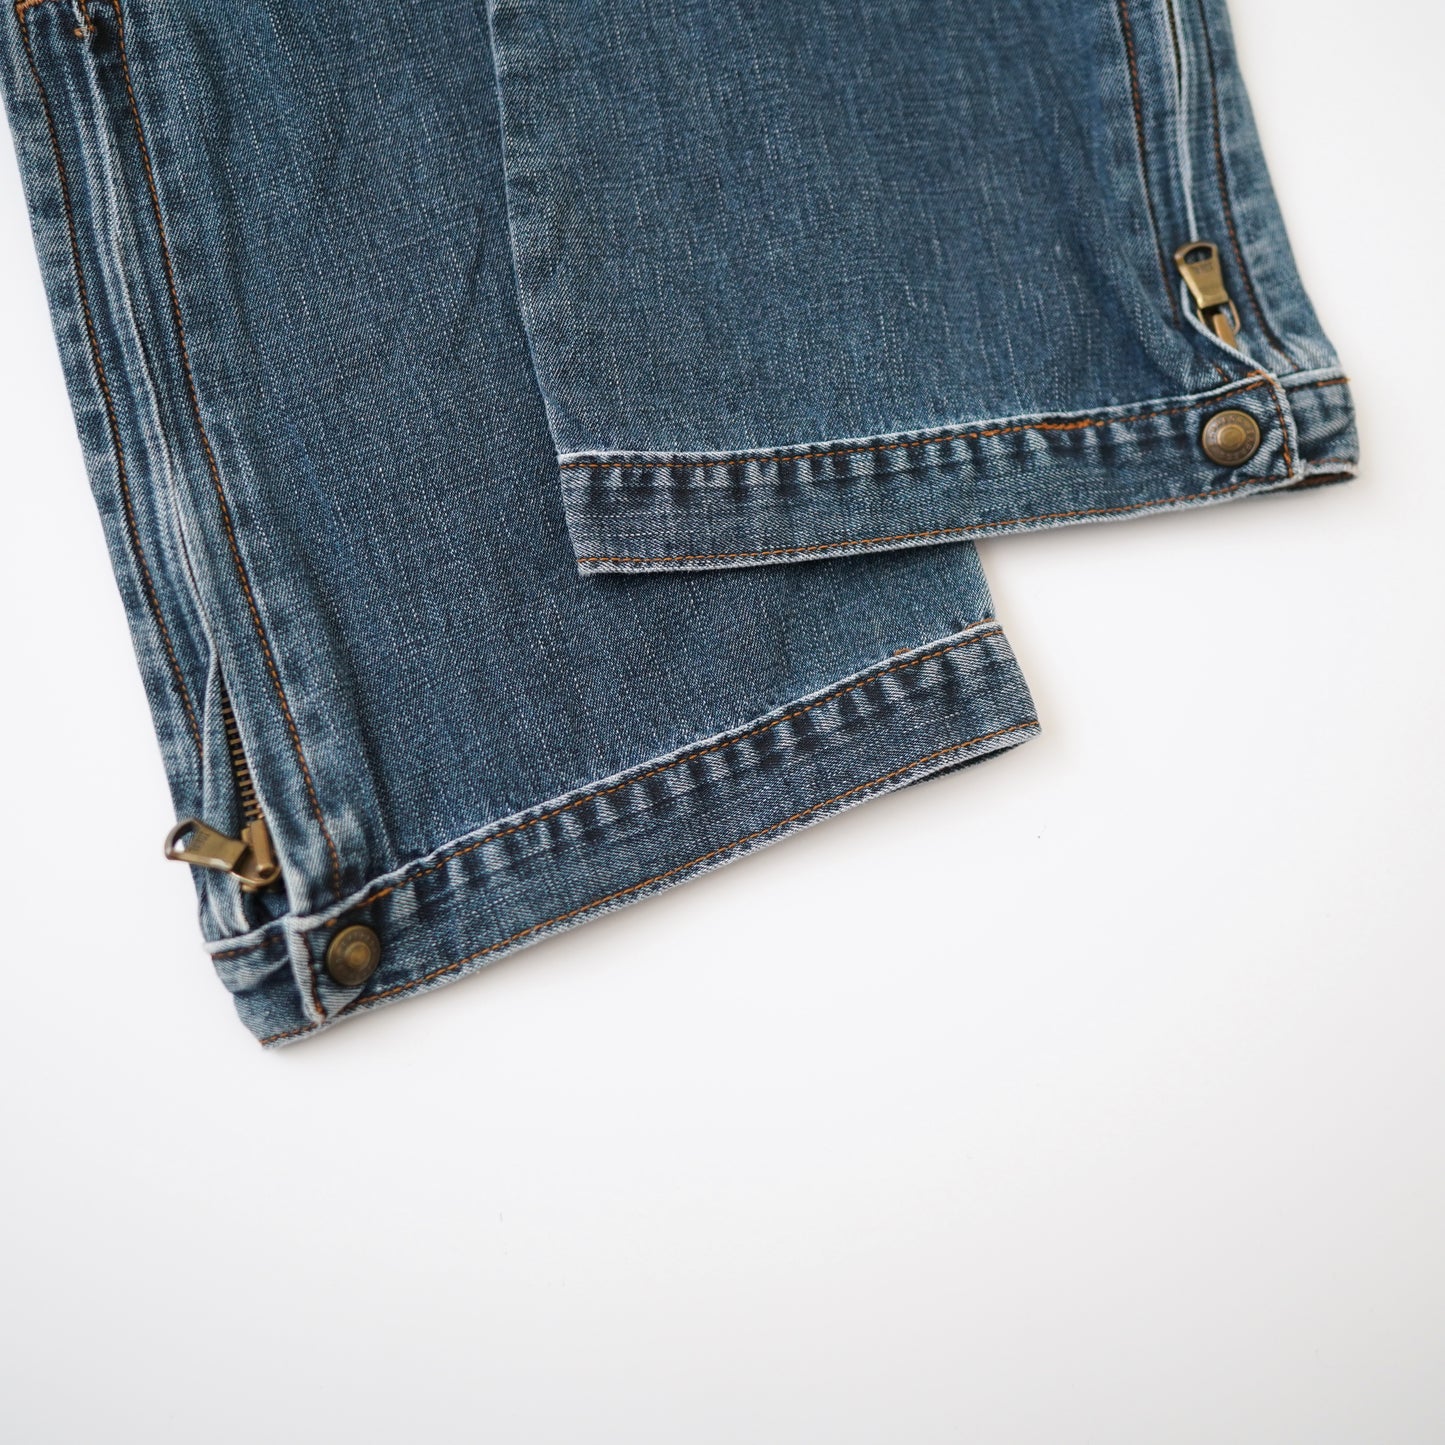 EXPRESS low rise jeans